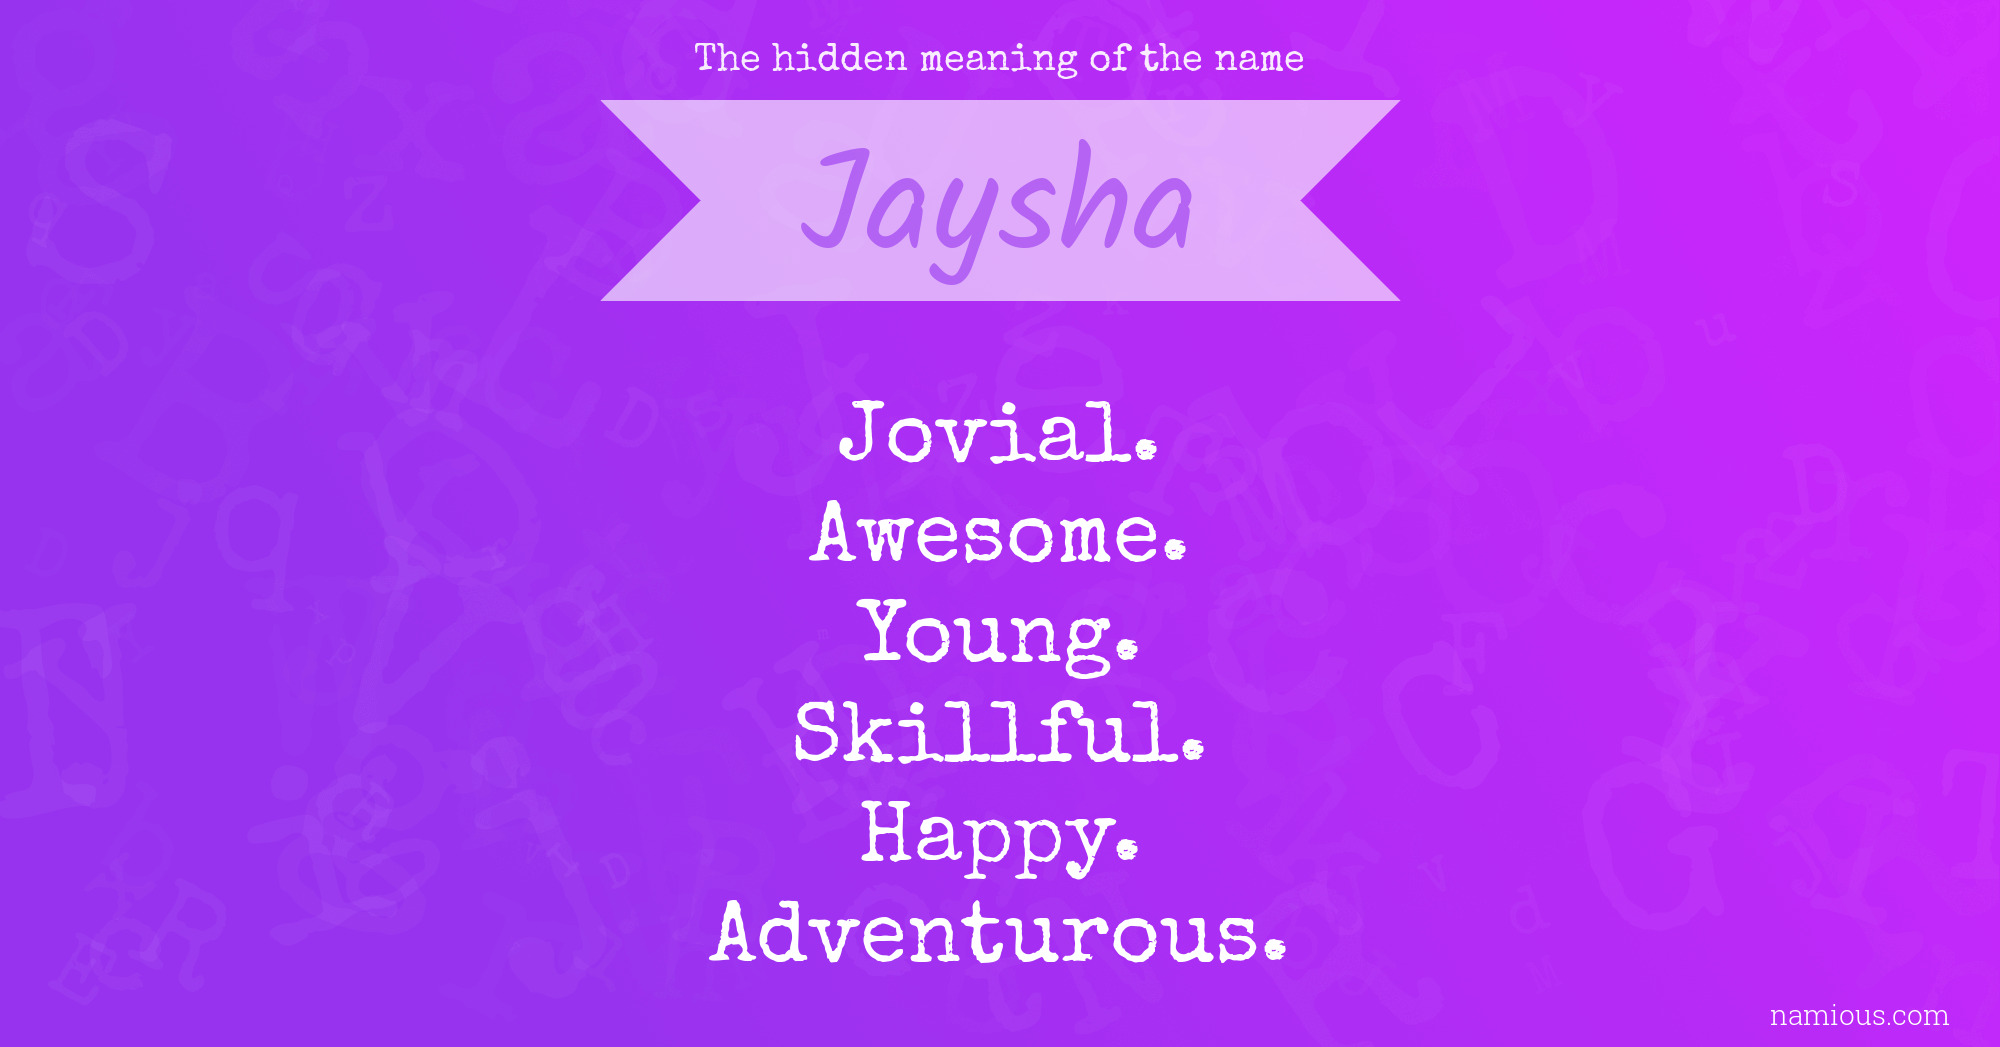 The hidden meaning of the name Jaysha